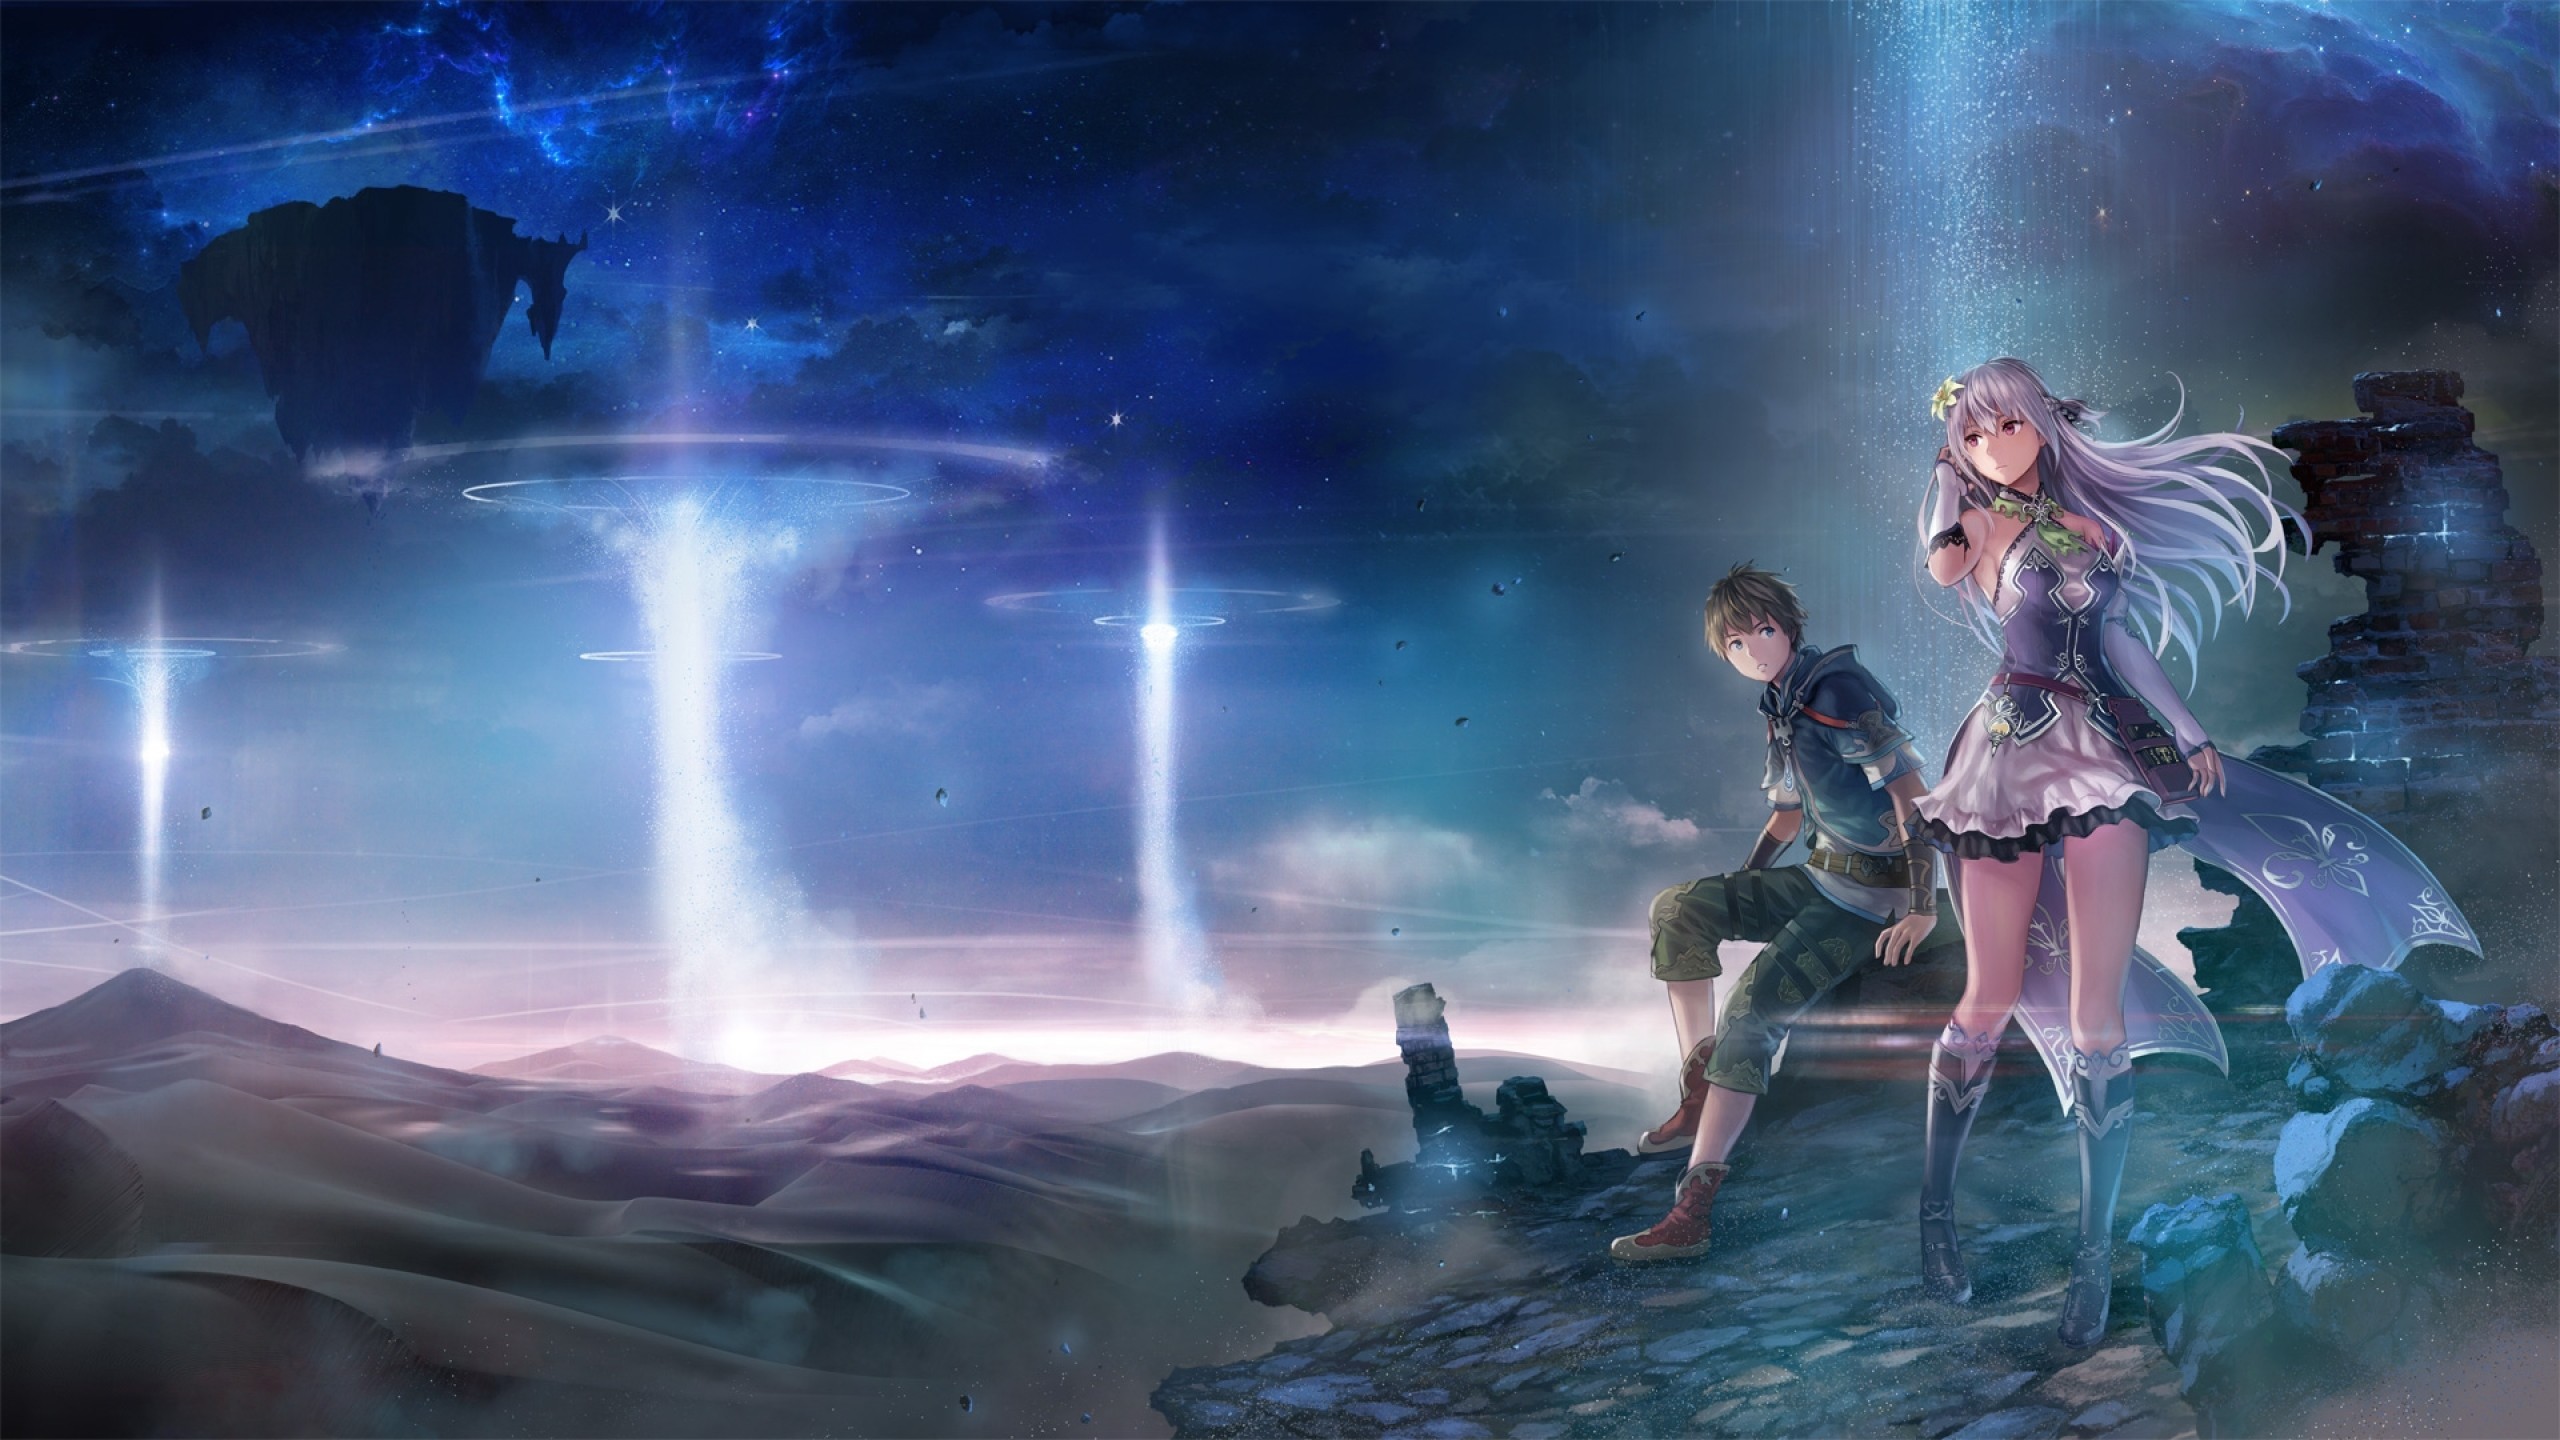 anime world wallpaper,cg artwork,action adventure game,adventure game,sky,fictional character